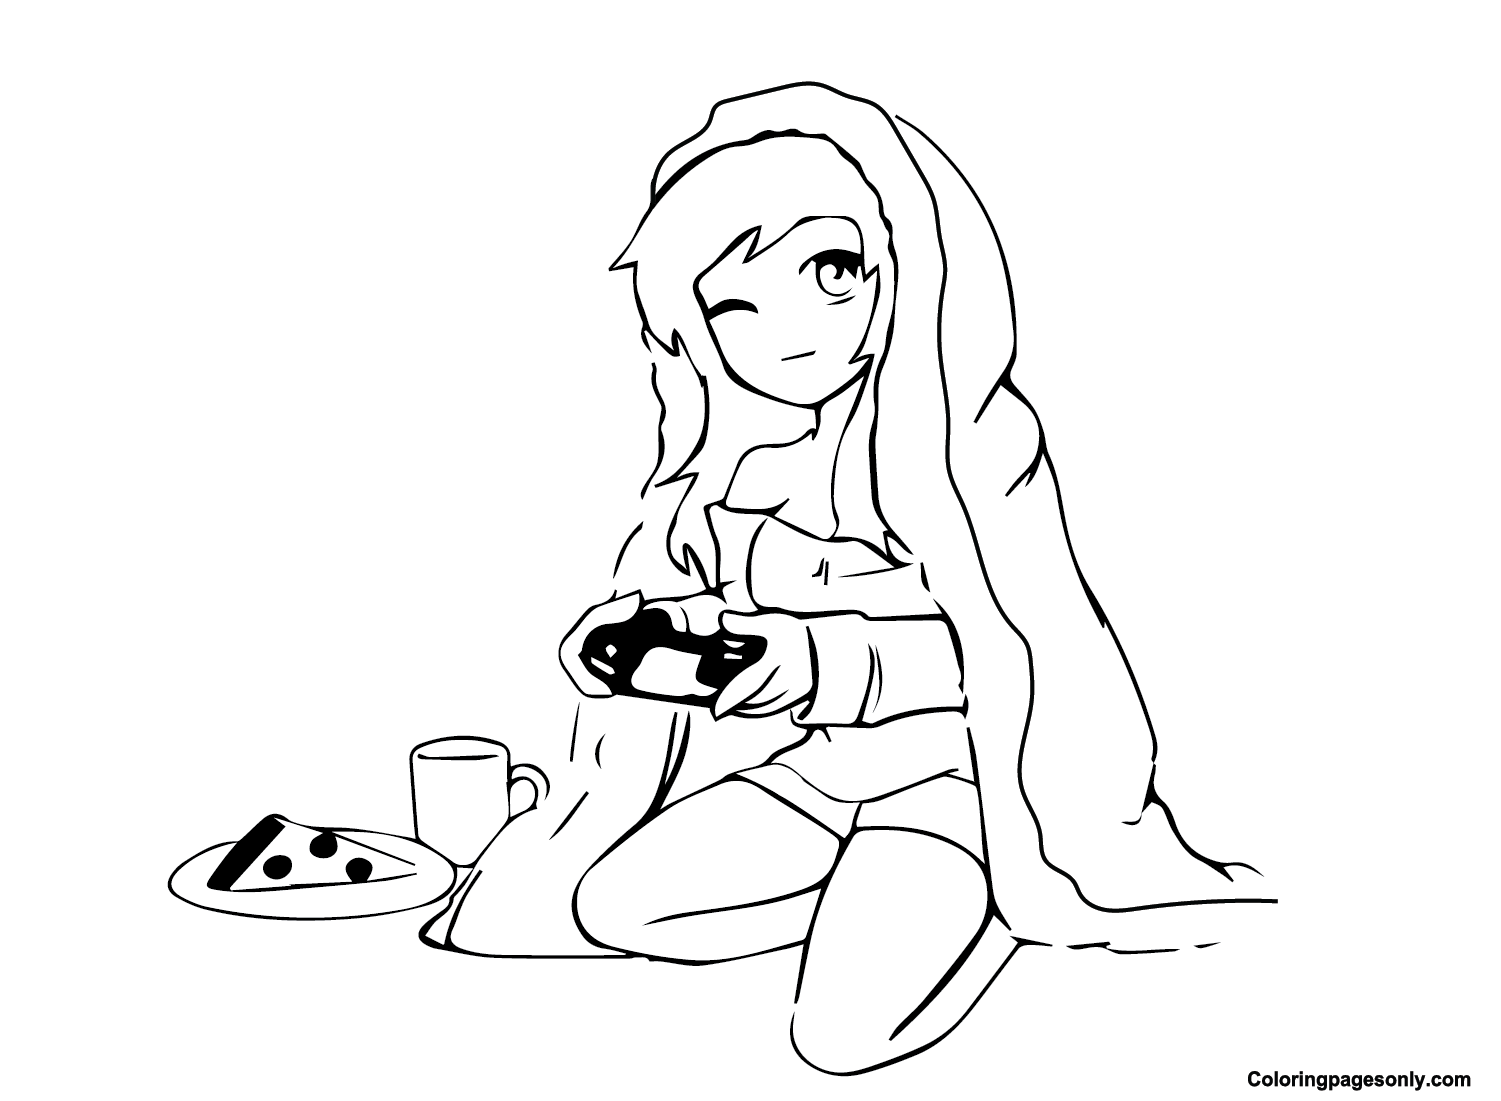 Aphmau Free Coloring Page